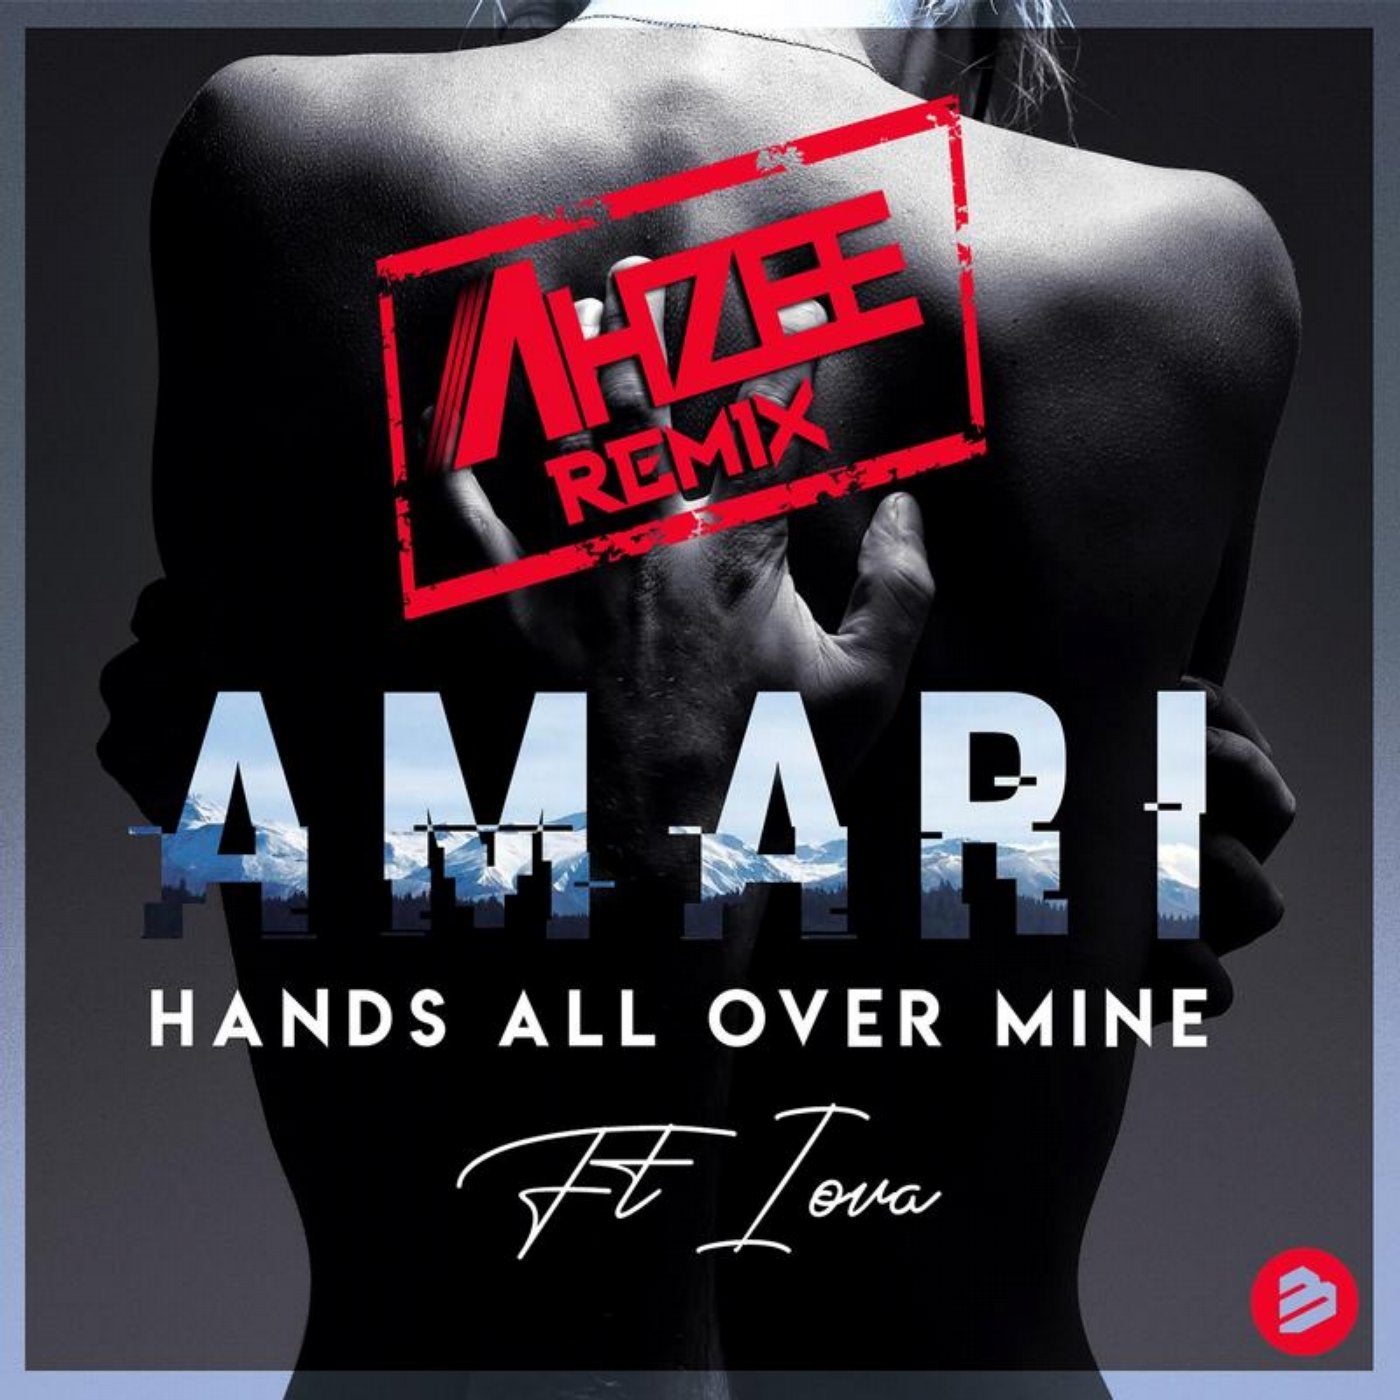 Hands All Over Mine (AHZEE Remix)